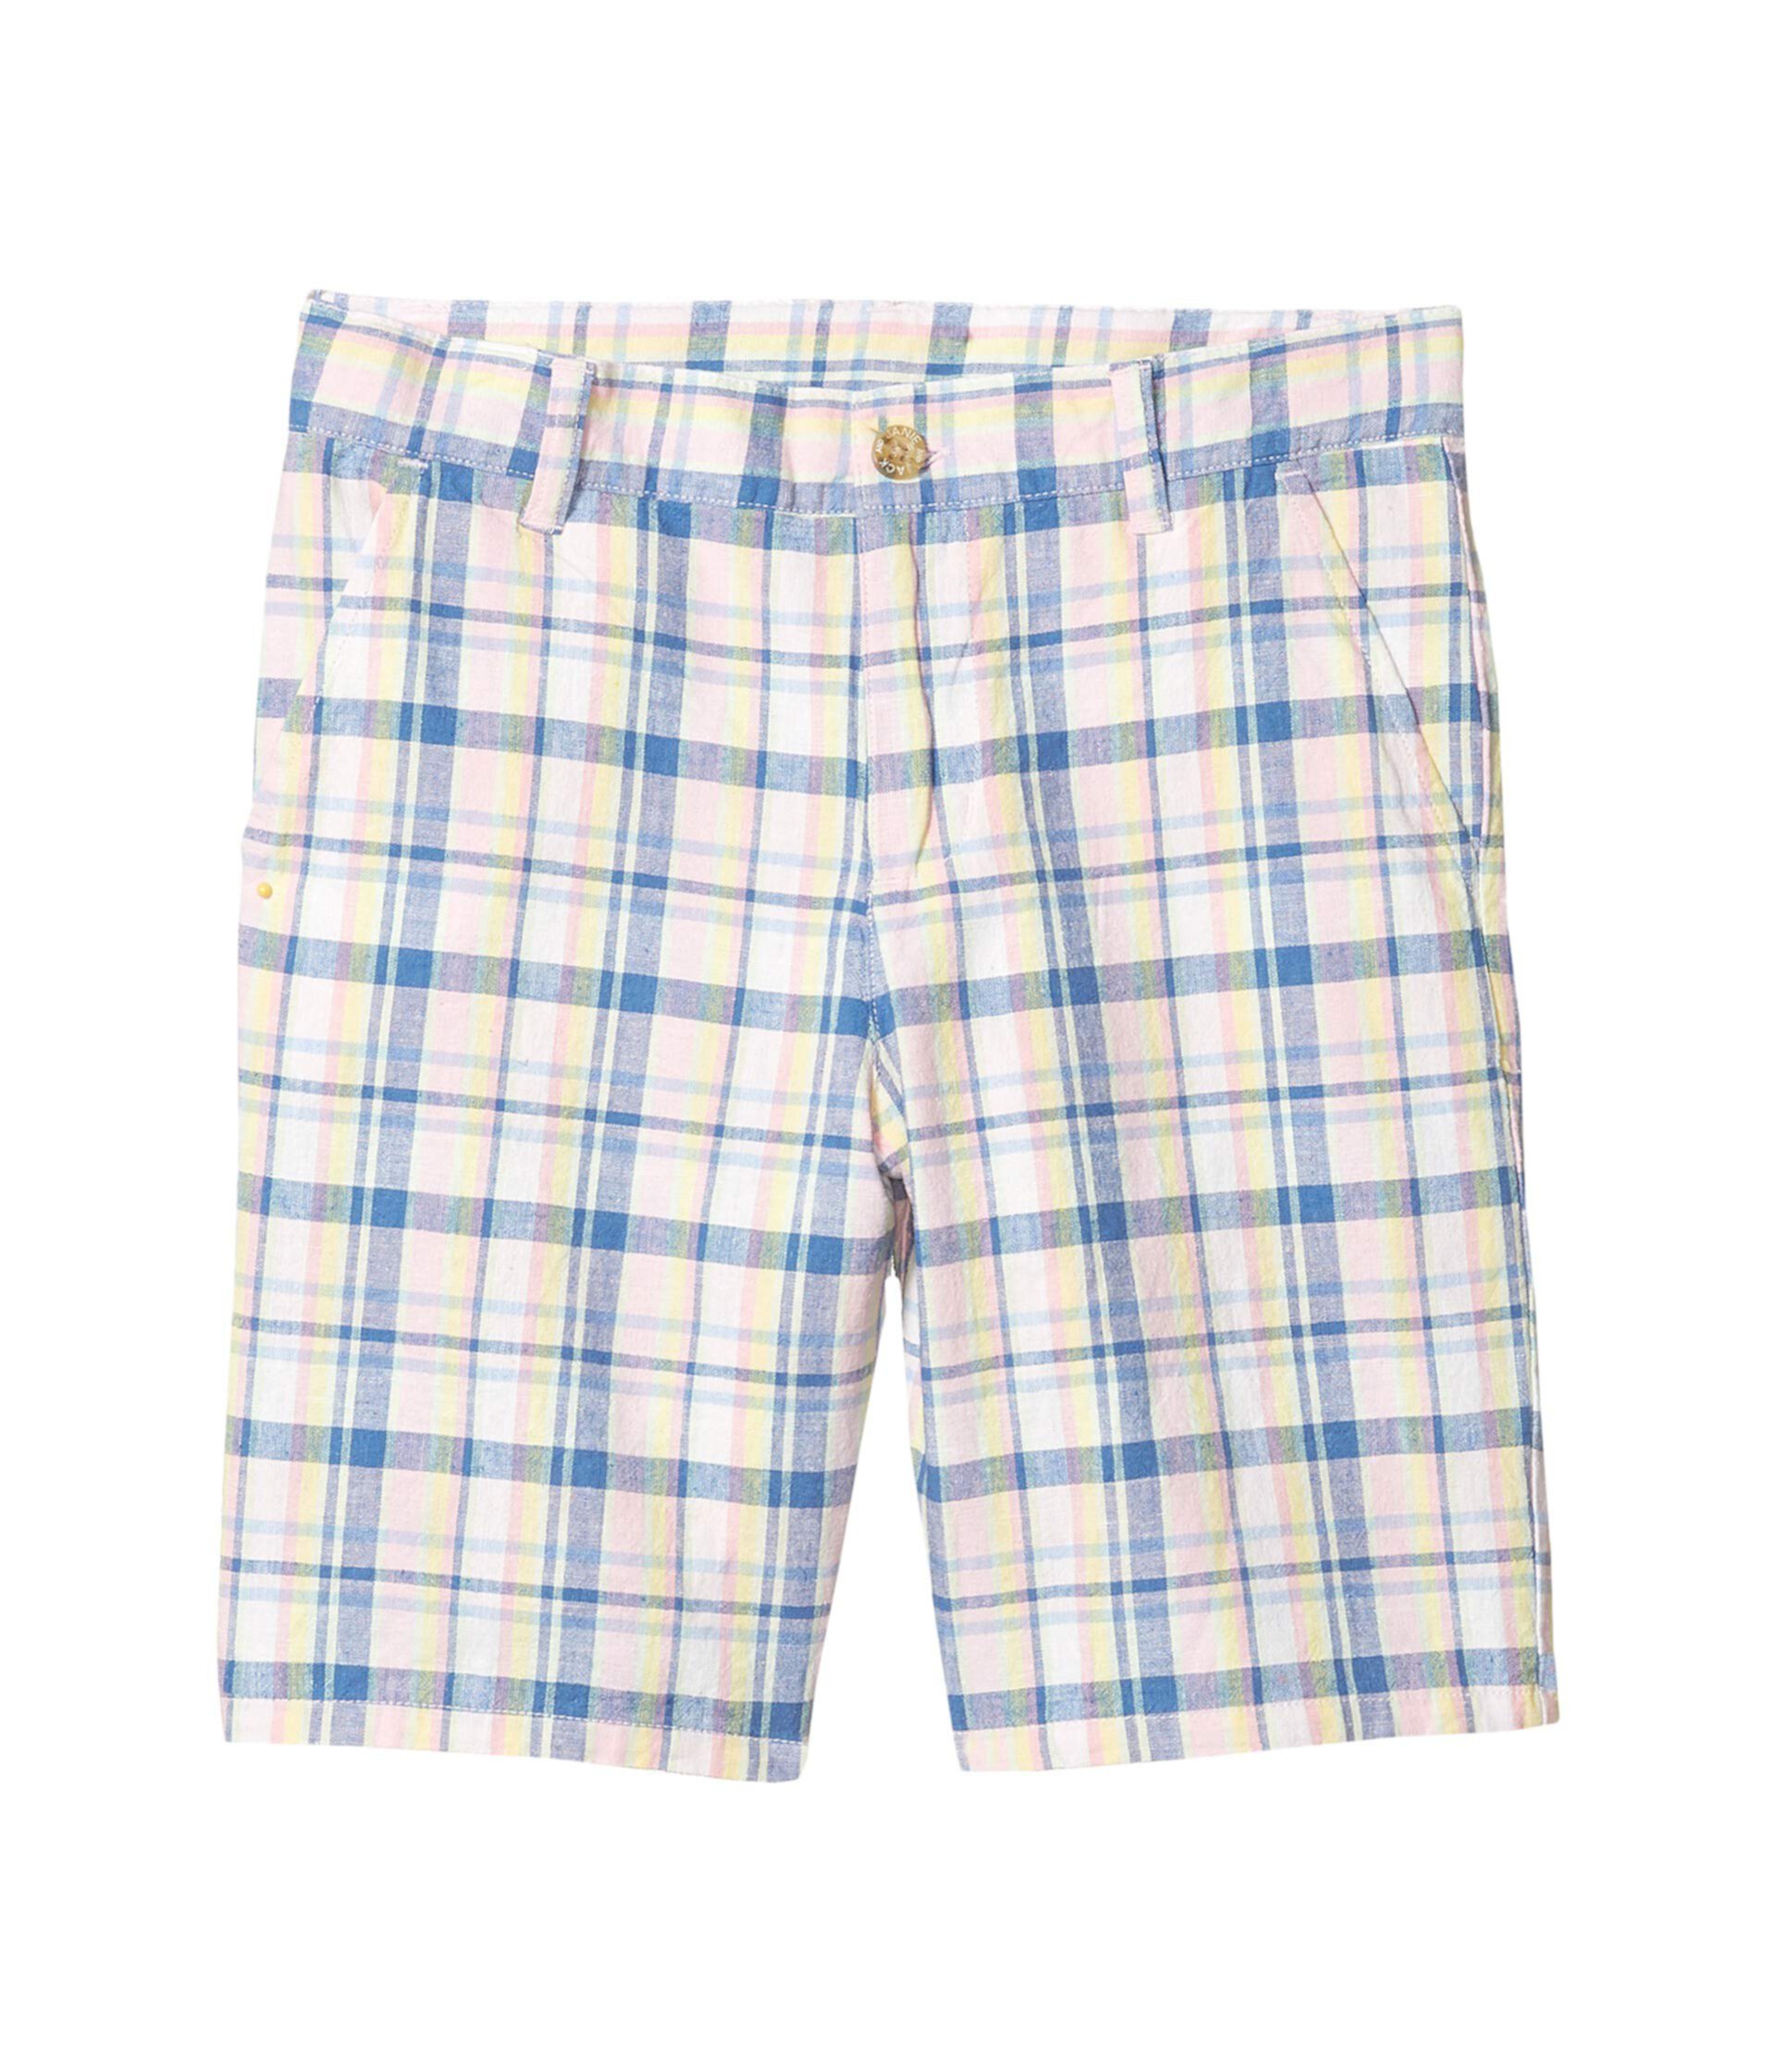 Flat Front Shorts (Toddler/Little Kids/Big Kids) Janie and Jack